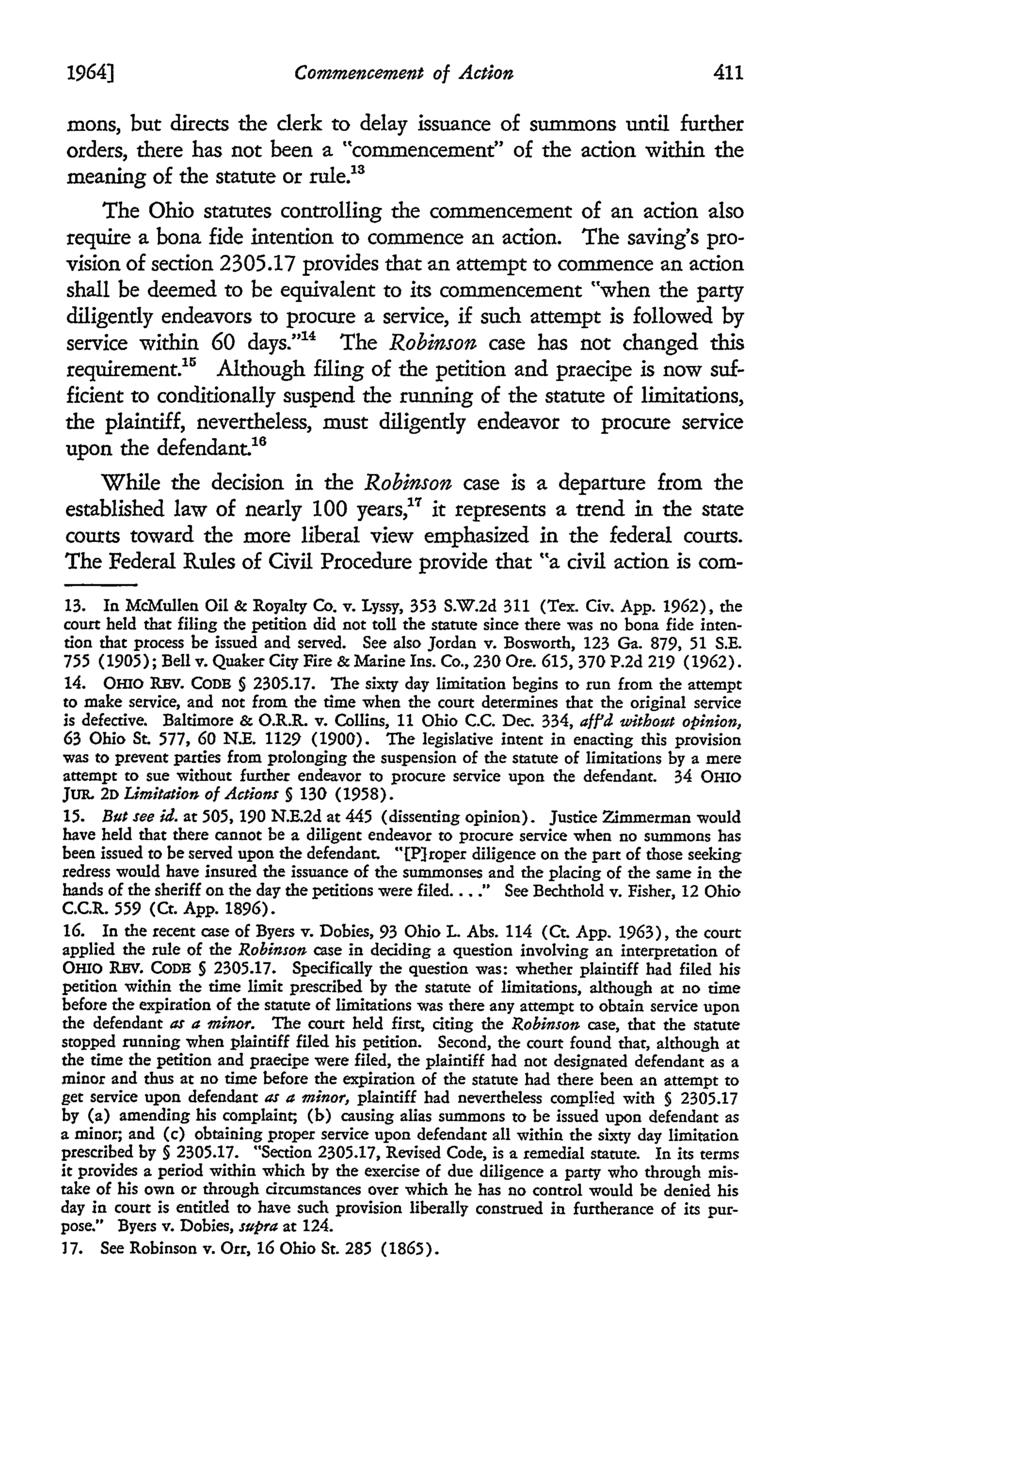 1964] mons, but directs the derk to delay issuance of summons until further orders, there has not been a "commencement" of the action within the meaning of the statute or rule.